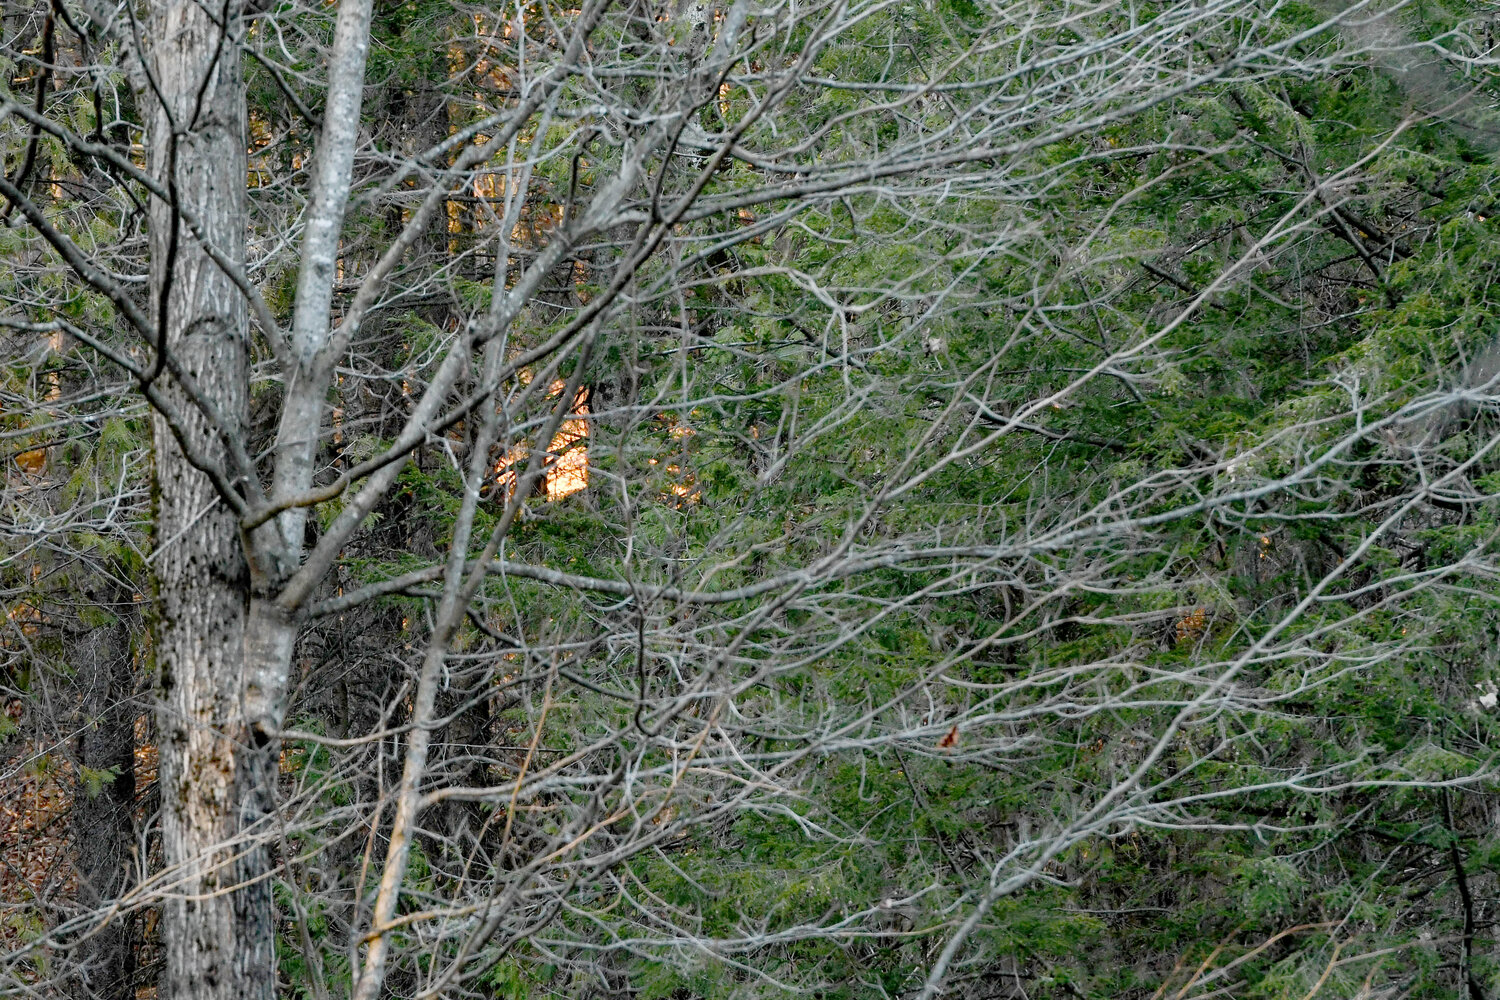 Flames shoot up behind a wooded area off Dover Road in the town of Russia in this spring 2022 file photo. In an effort to prevent brush and grass fires, the state Department of Environmental Conservation will institute the state’s annual ban prohibiting residential brush burning, starting March 16.